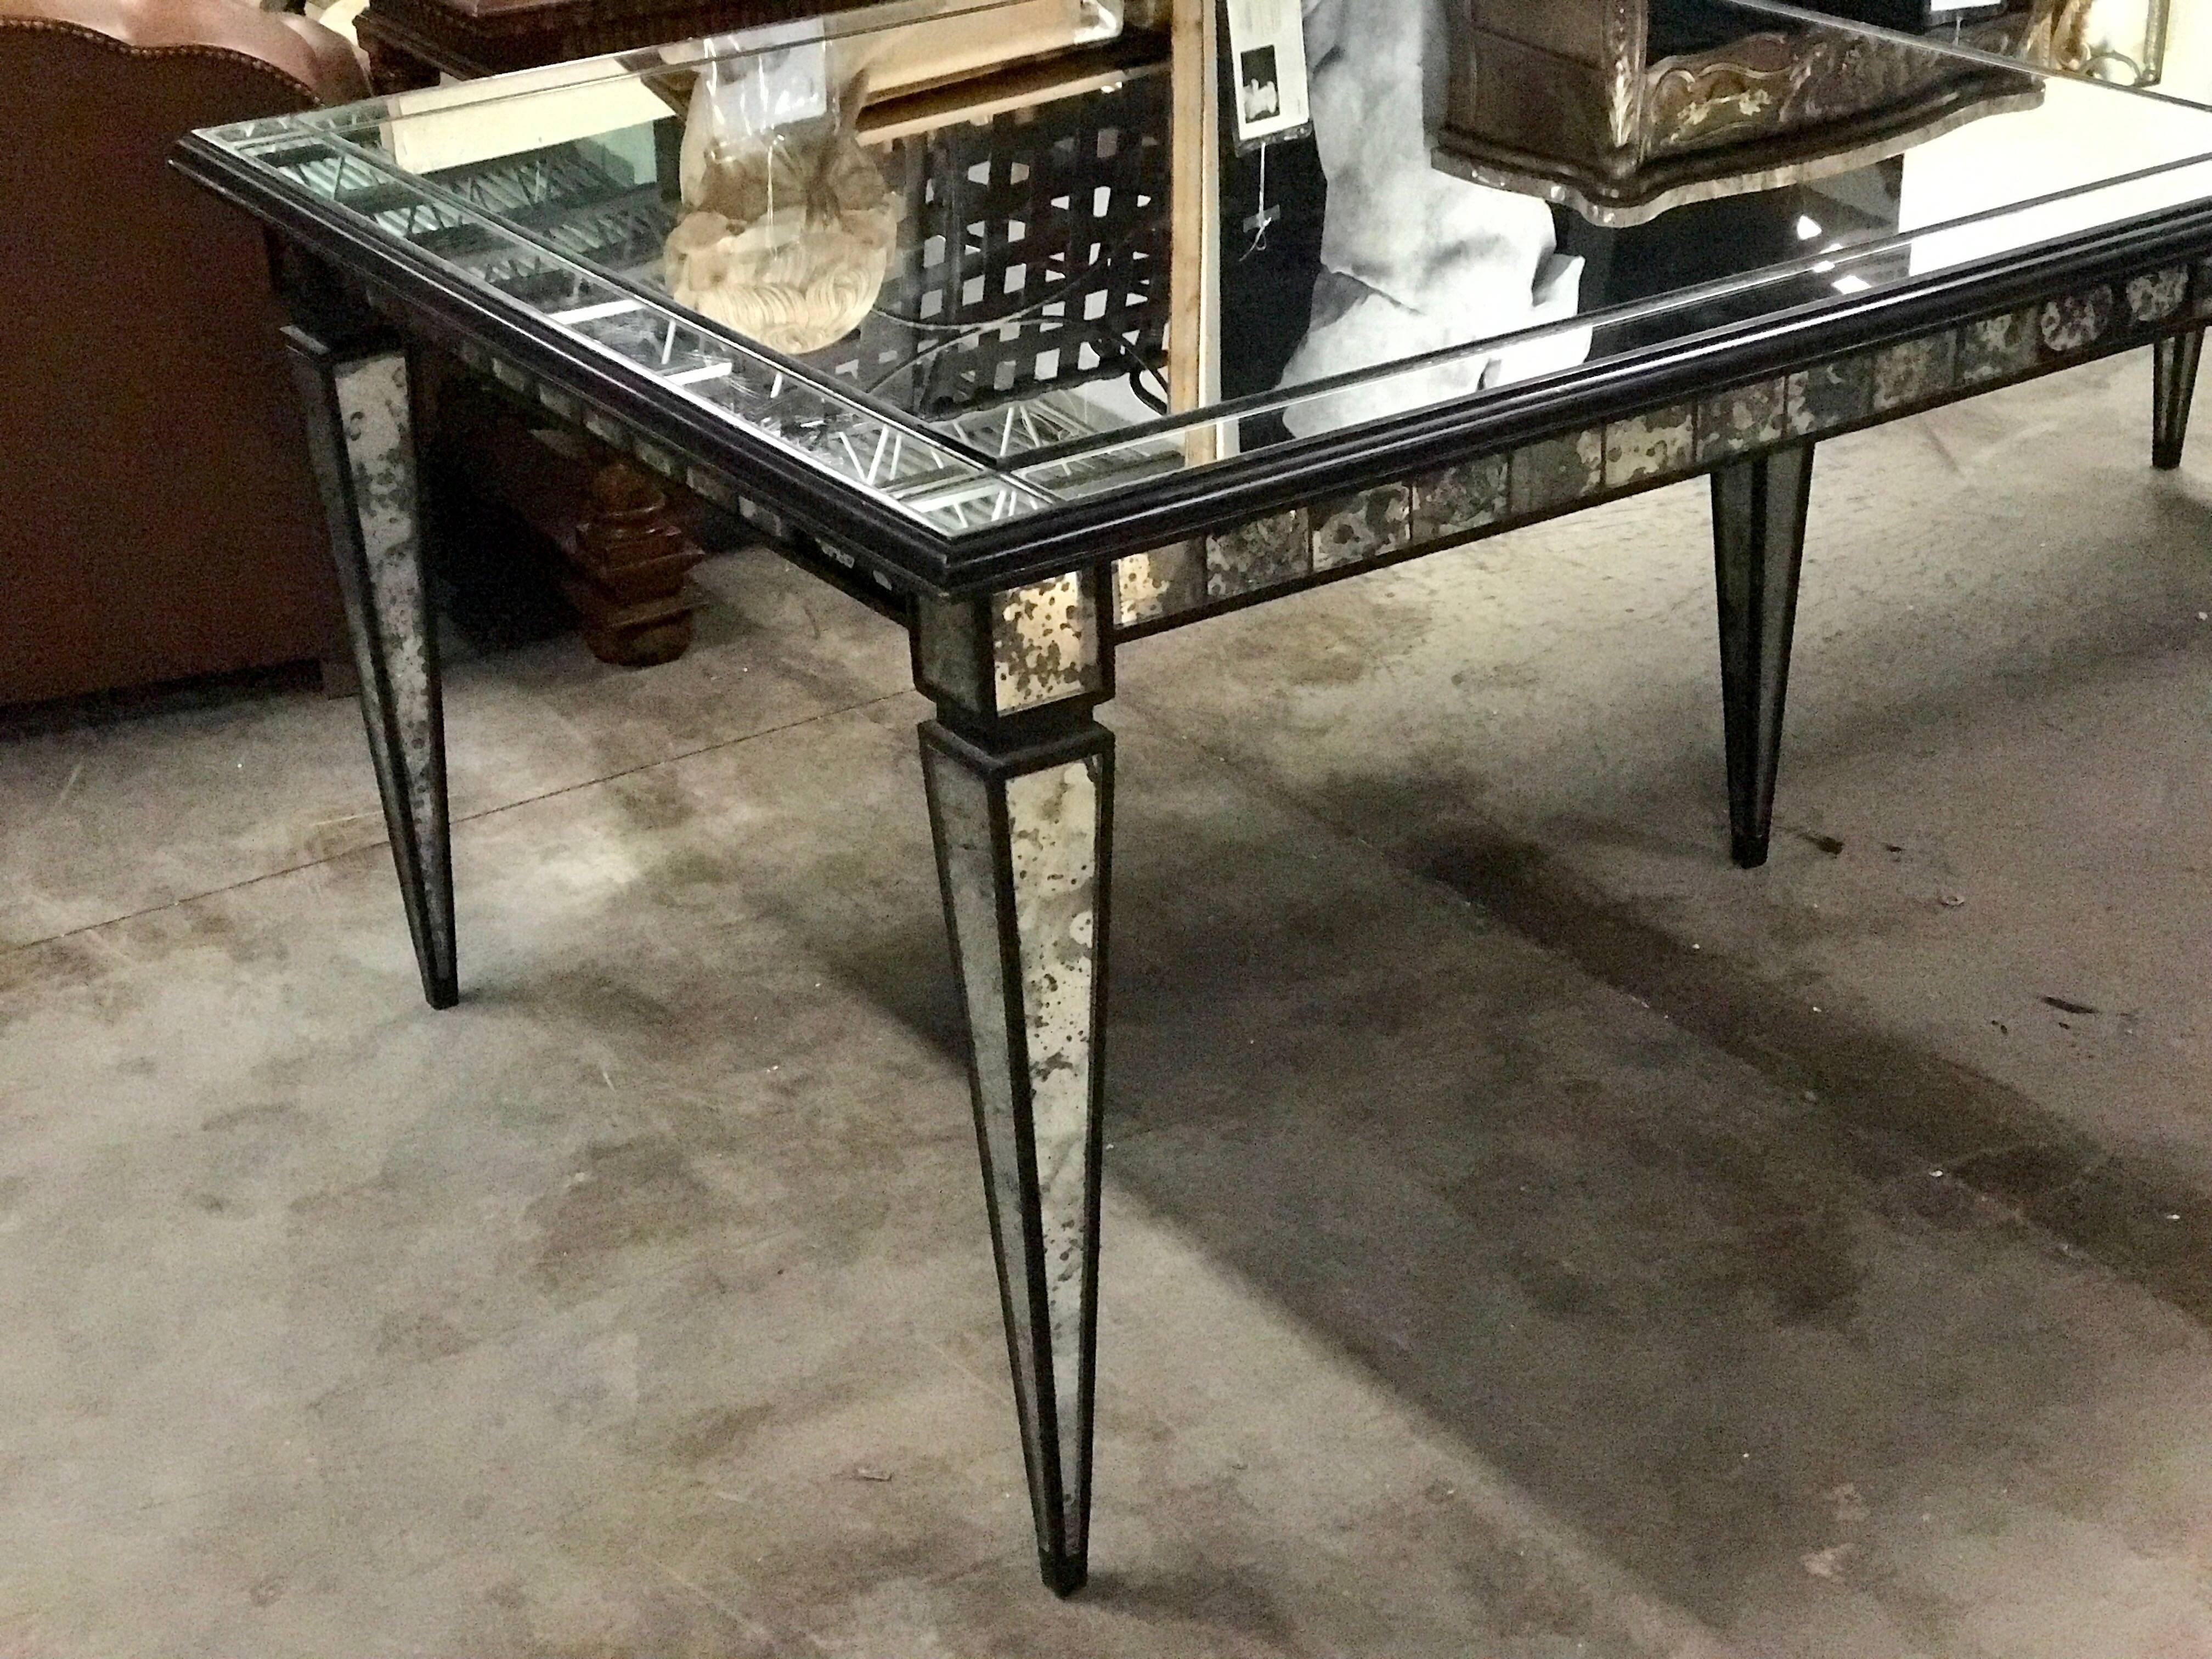 Stunning Maison Jansen blackened wood mirrored dining room table, in two equal parts with middle support leg if desired. Fitted with clear mirror on the surface and intentionally distressed mirror on the legs.